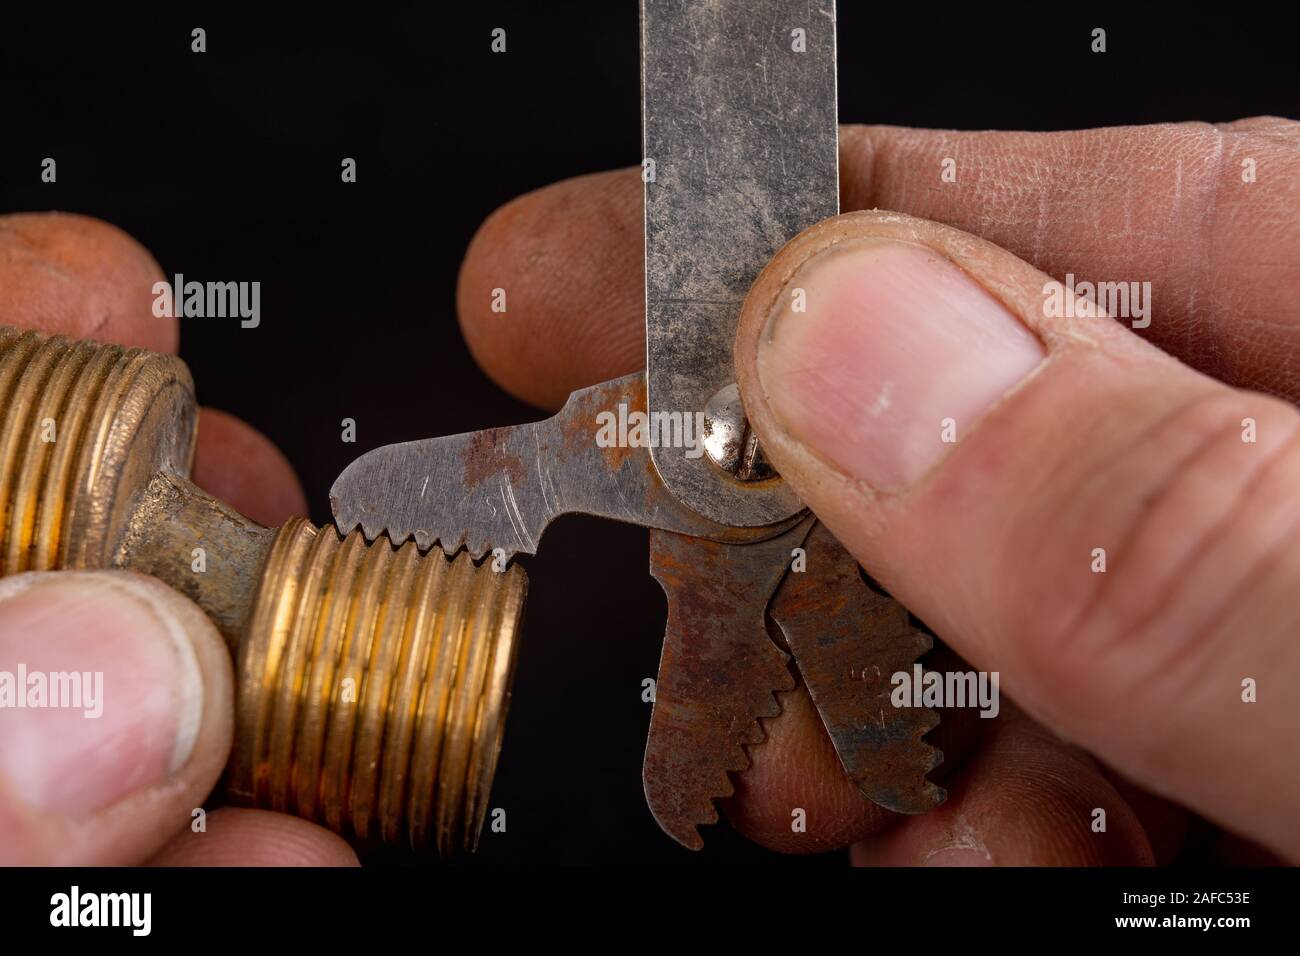 Checking the screw thread with an analog meter. Correctness of the threaded connection. Dark background. Stock Photo